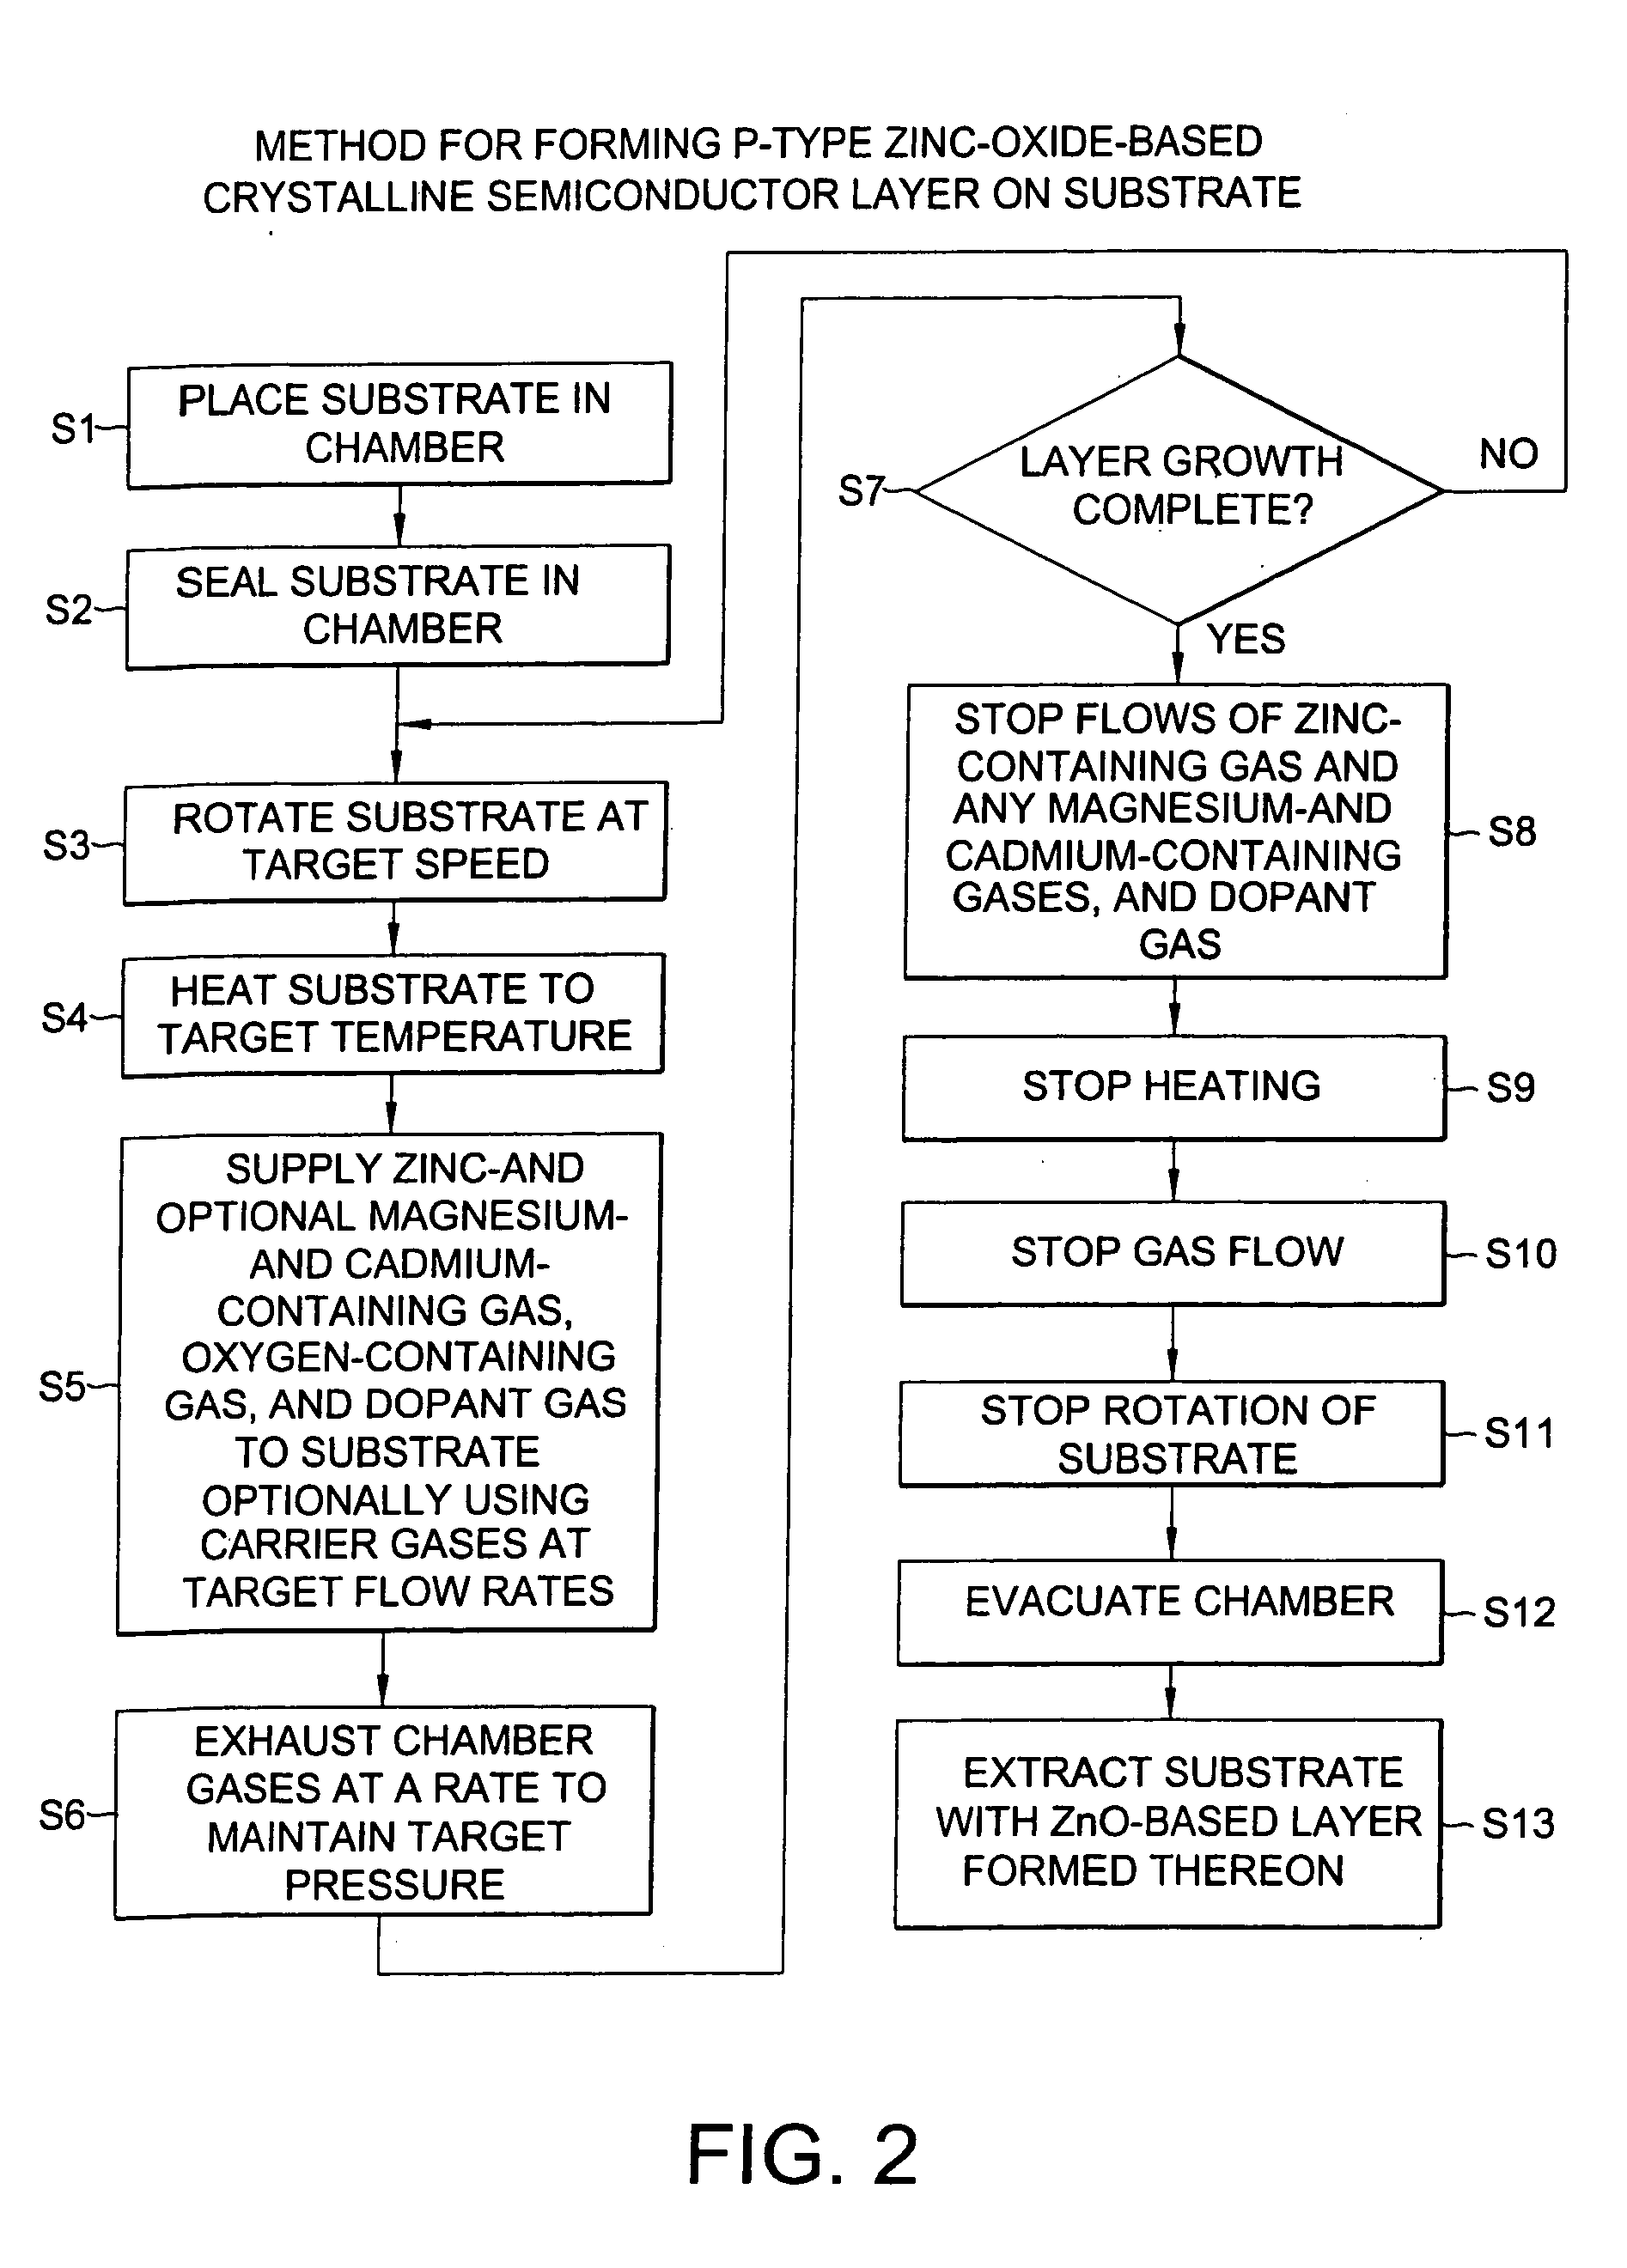 Method of forming a p-type group II-VI semiconductor crystal layer on a substrate